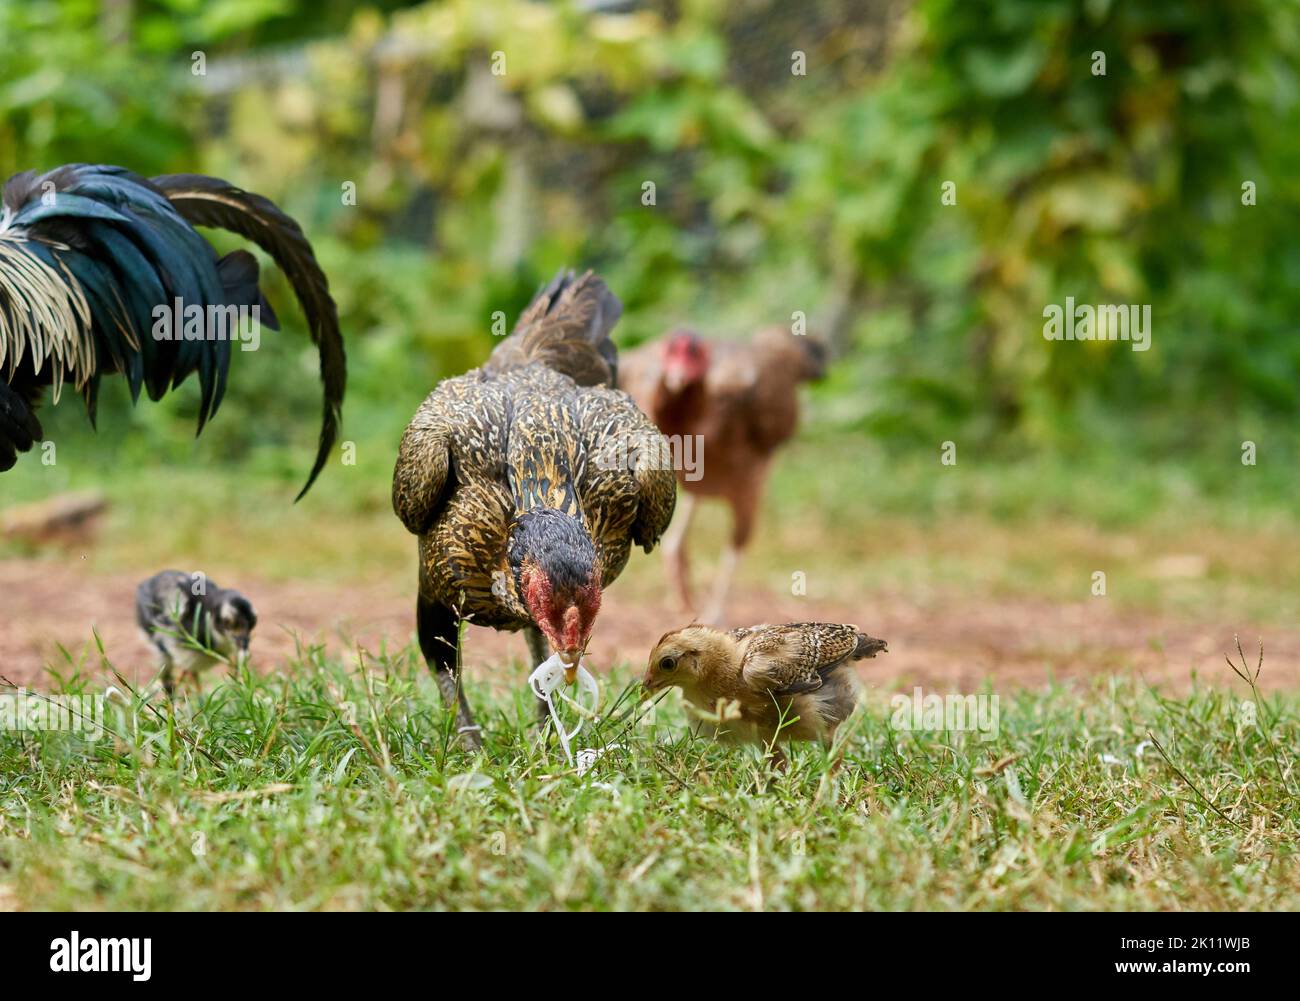 Funny free range chickens eating noodles. Stock Photo